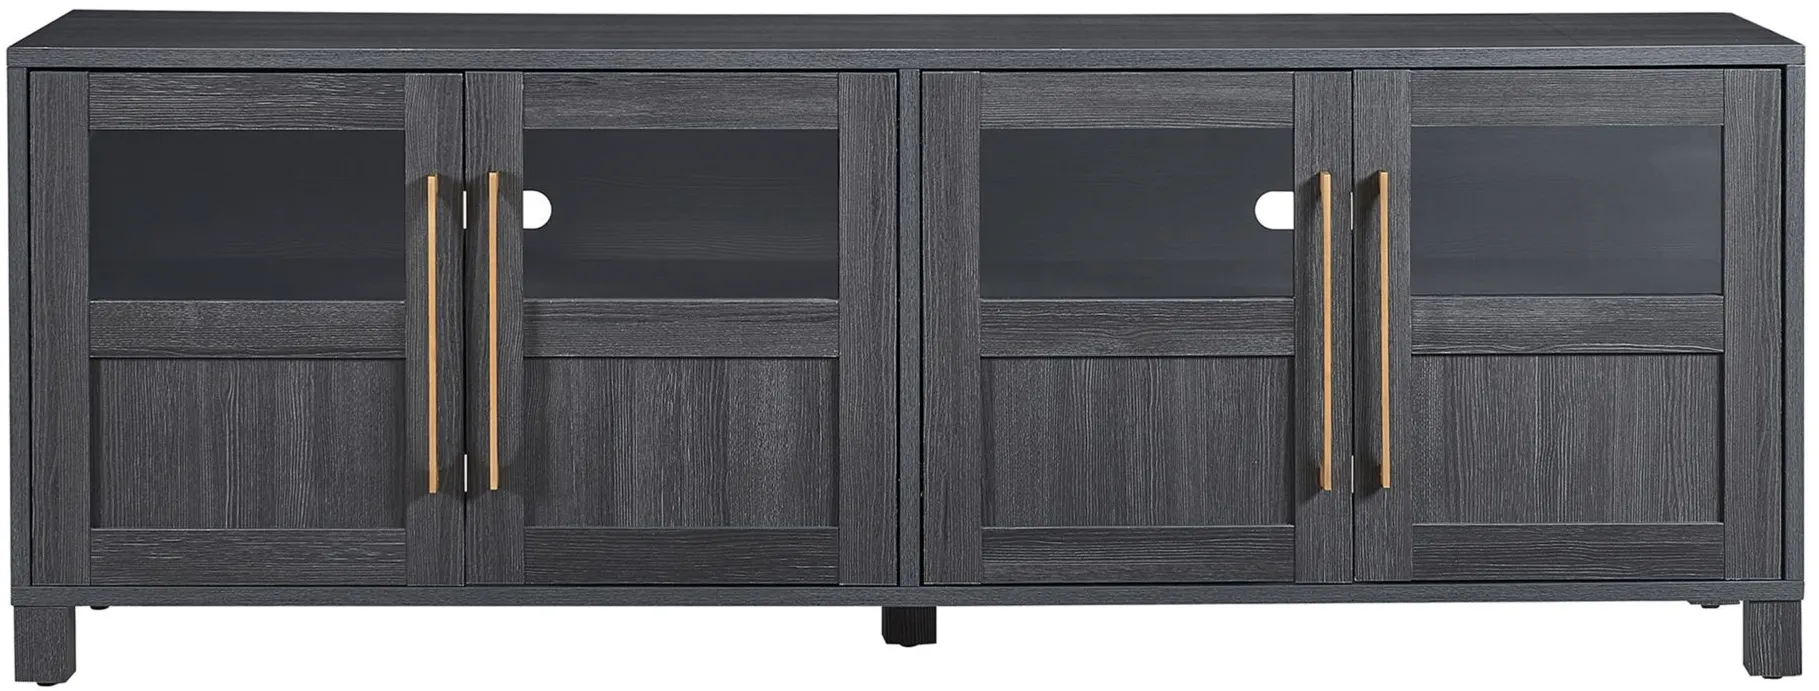 Sarmento TV Stand in Charcoal Gray by Hudson & Canal